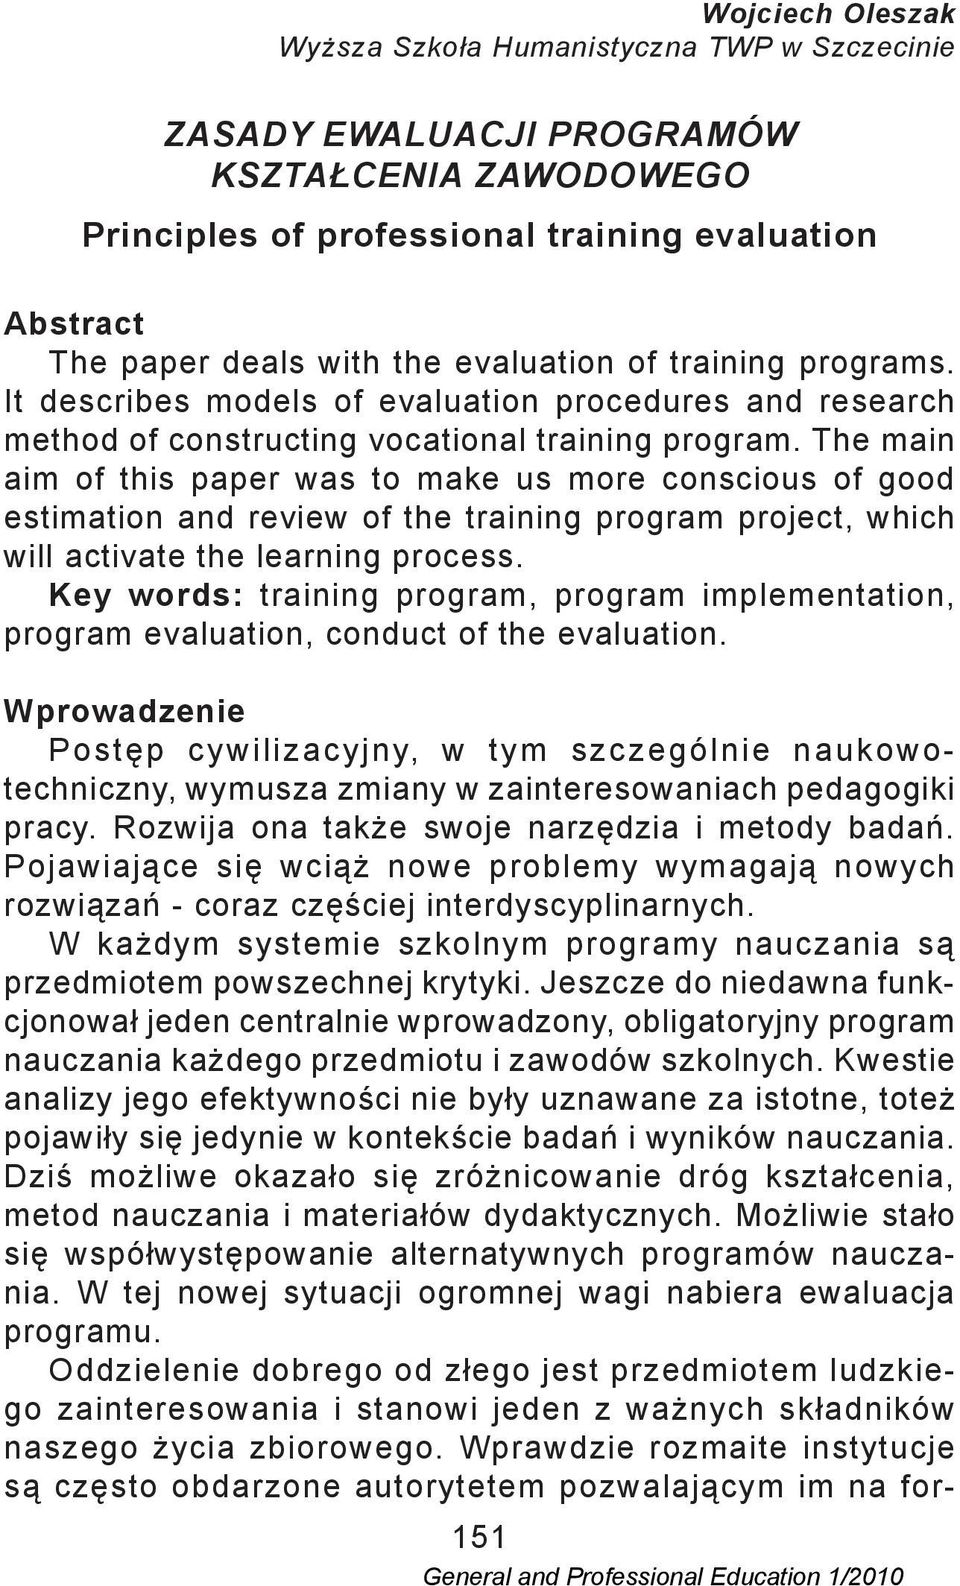 The main aim of this paper was to make us more conscious of good estimation and review of the training program project, which will activate the learning process.